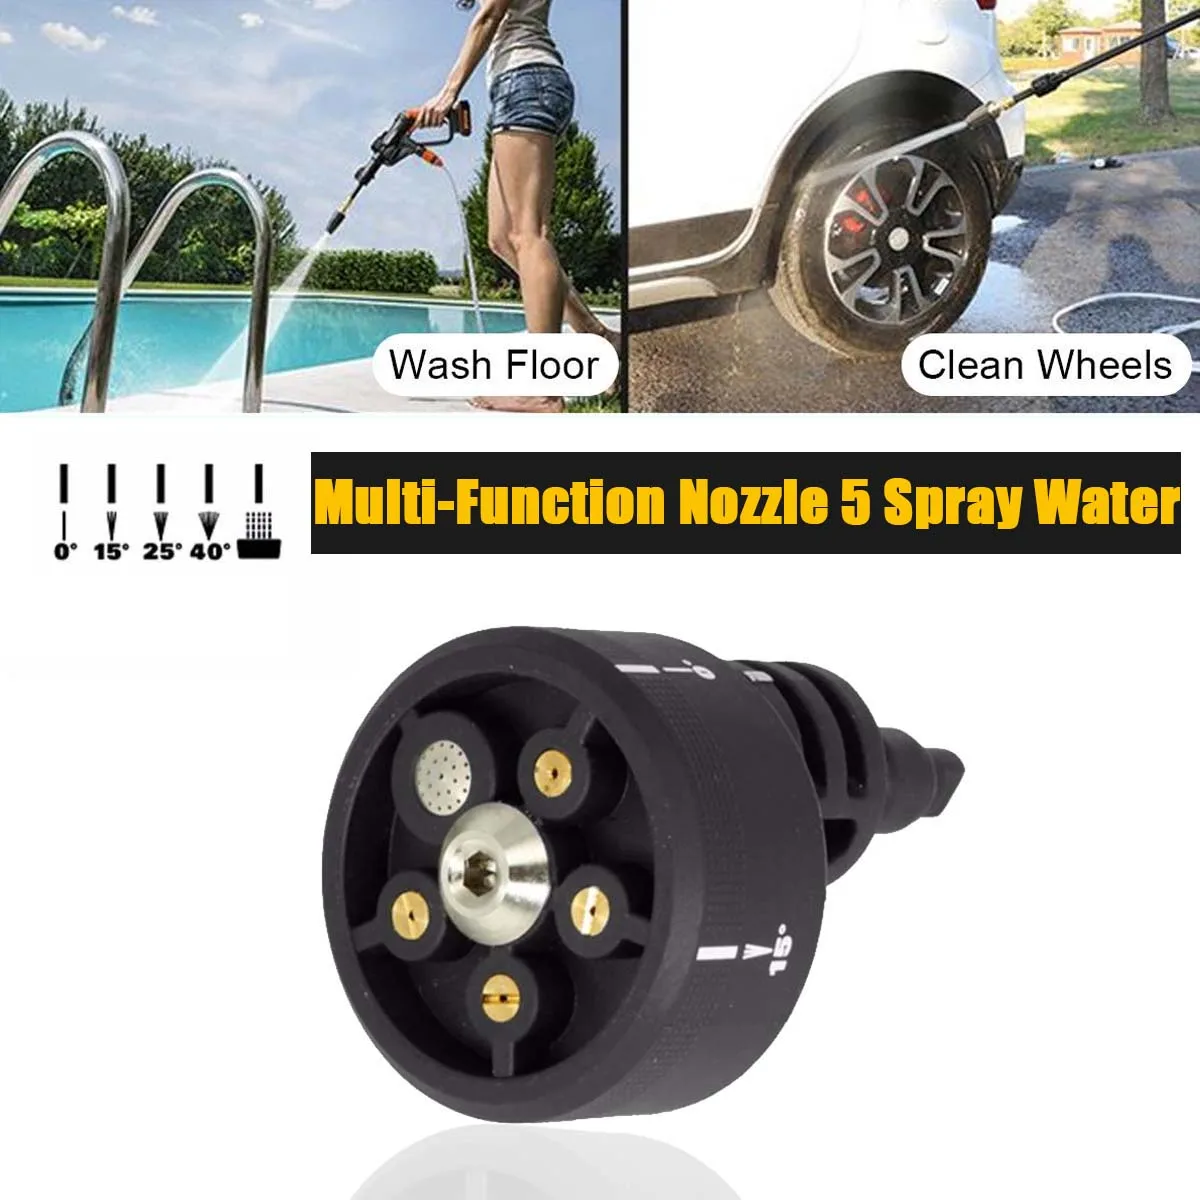 Multi-Function Nozzle 5 Spray Water High Power Washer Cleaner Tool For WORX Hydroshot WG629 WU629 WG630 Car Accessories